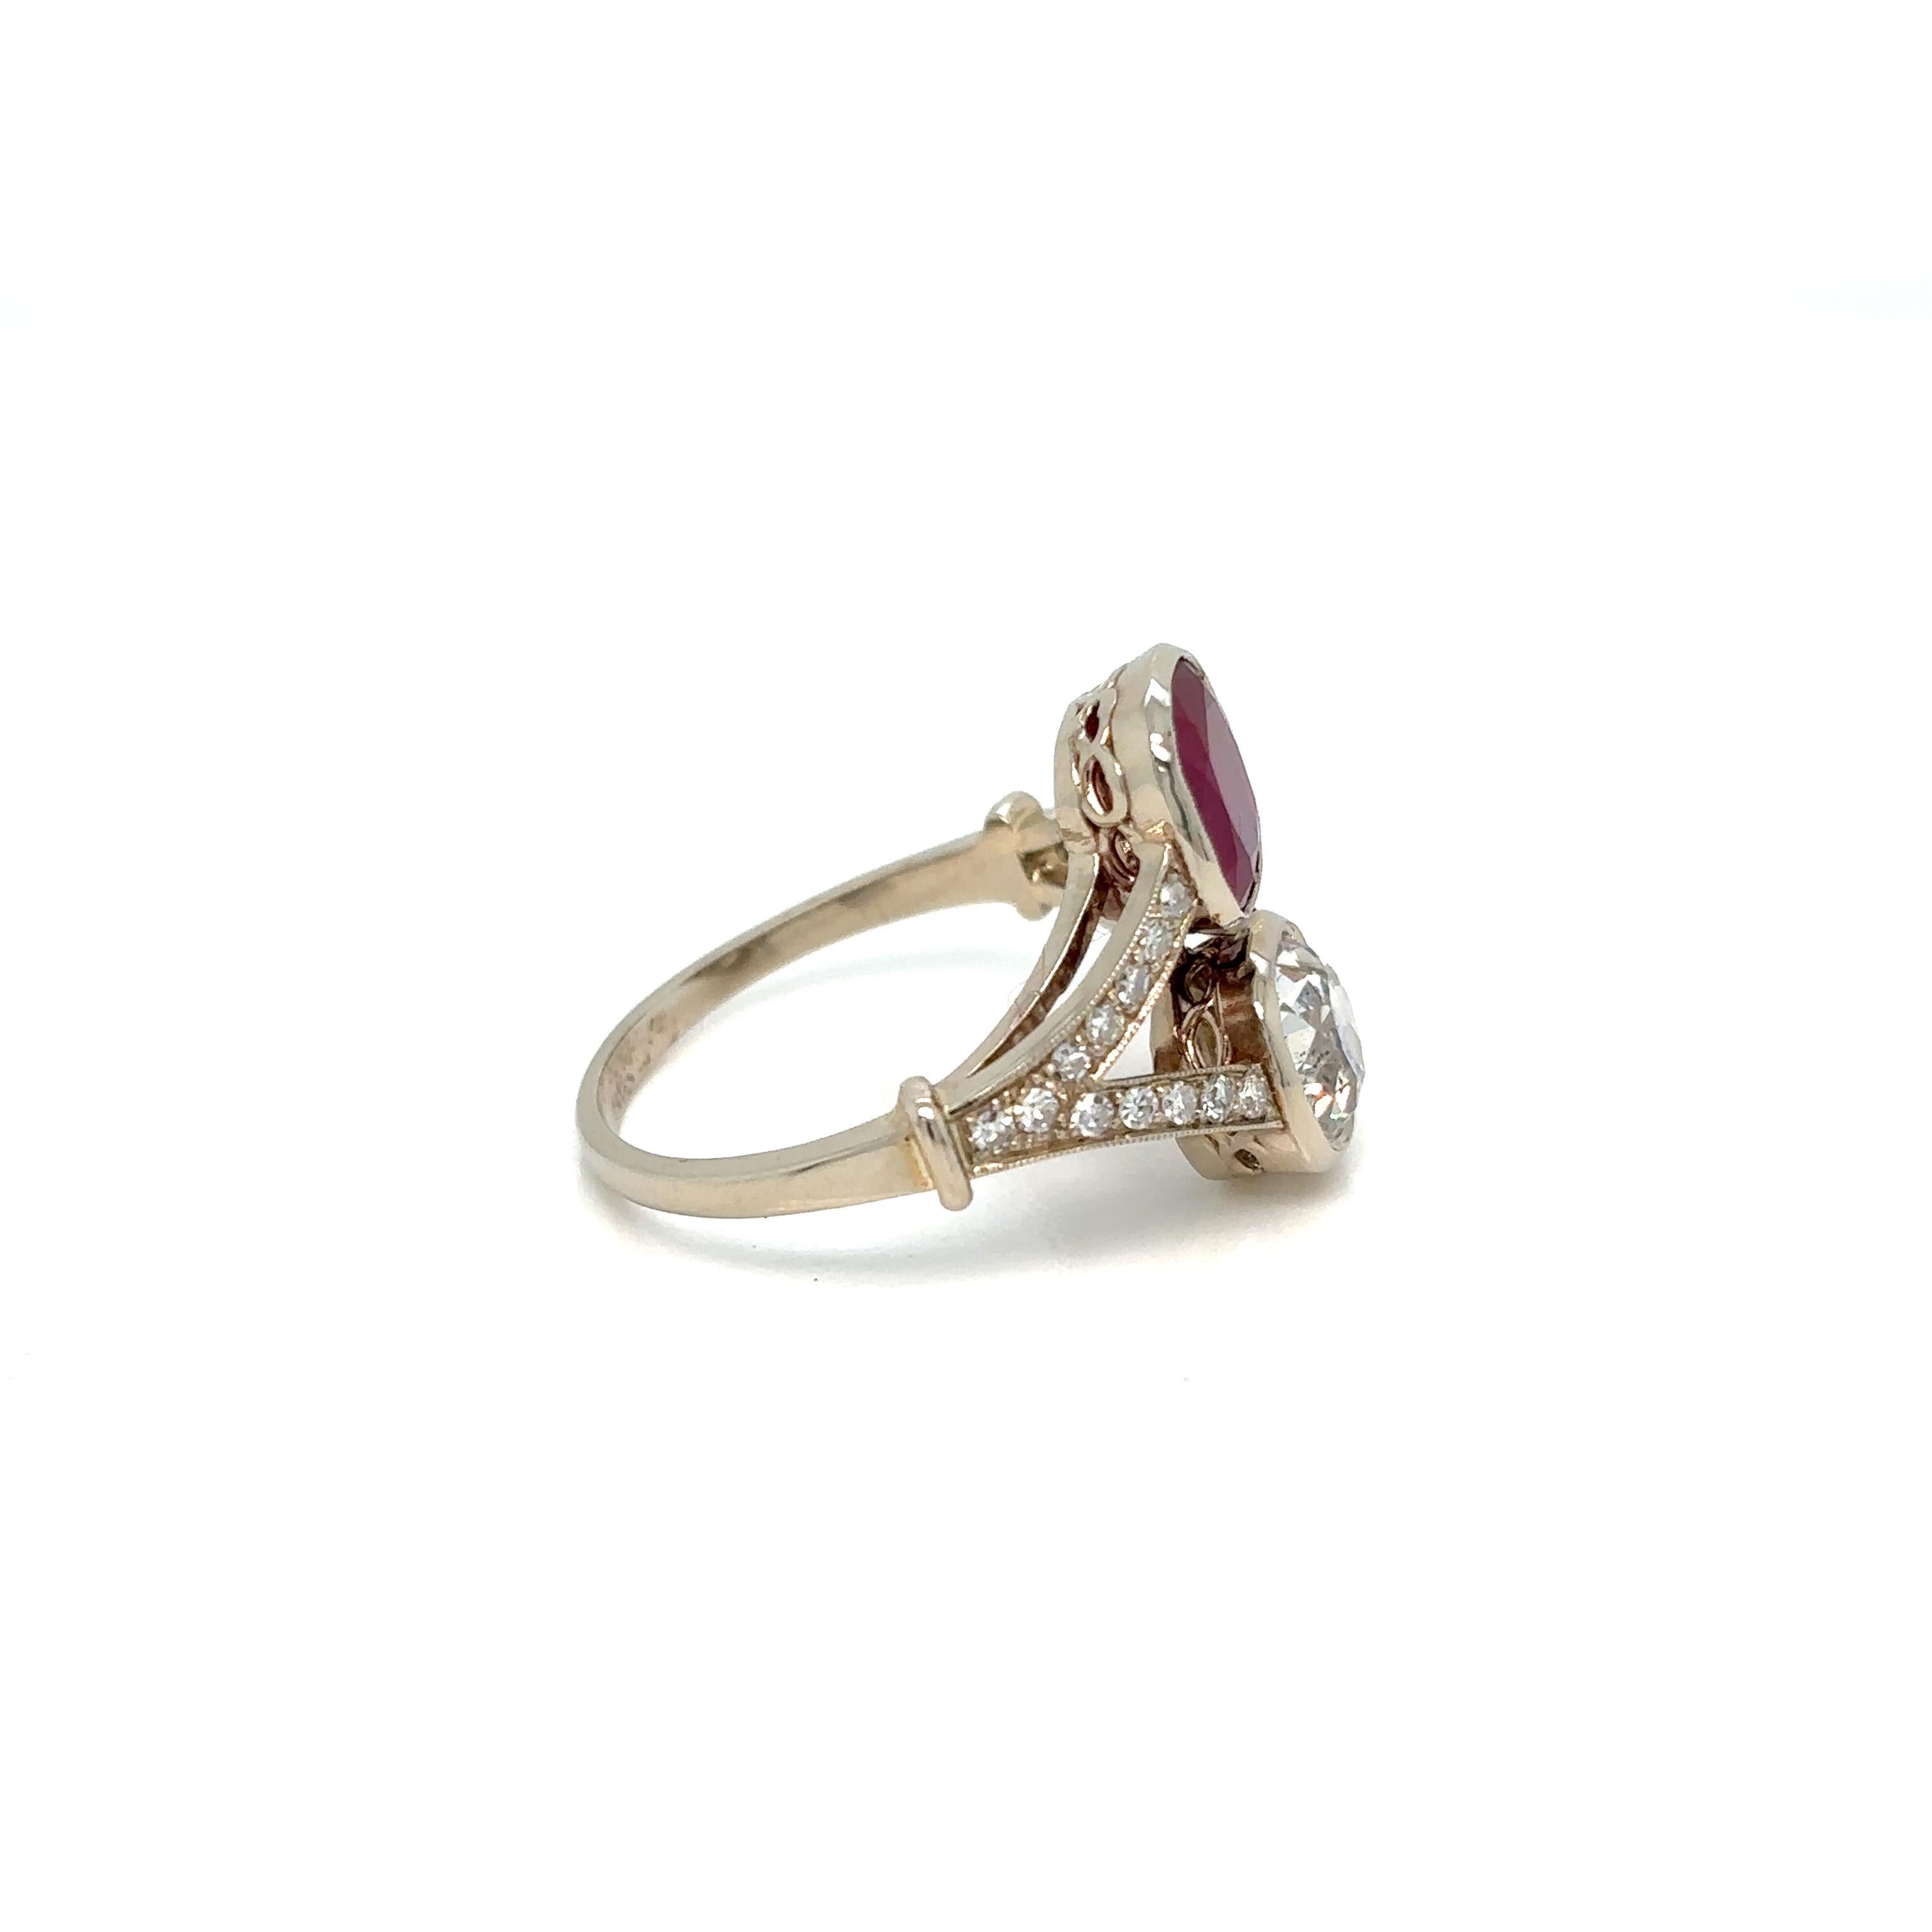 Antique Cushion Cut Victorian Certified Natural Unheated Ruby Diamond Vous et Moi Ring For Sale